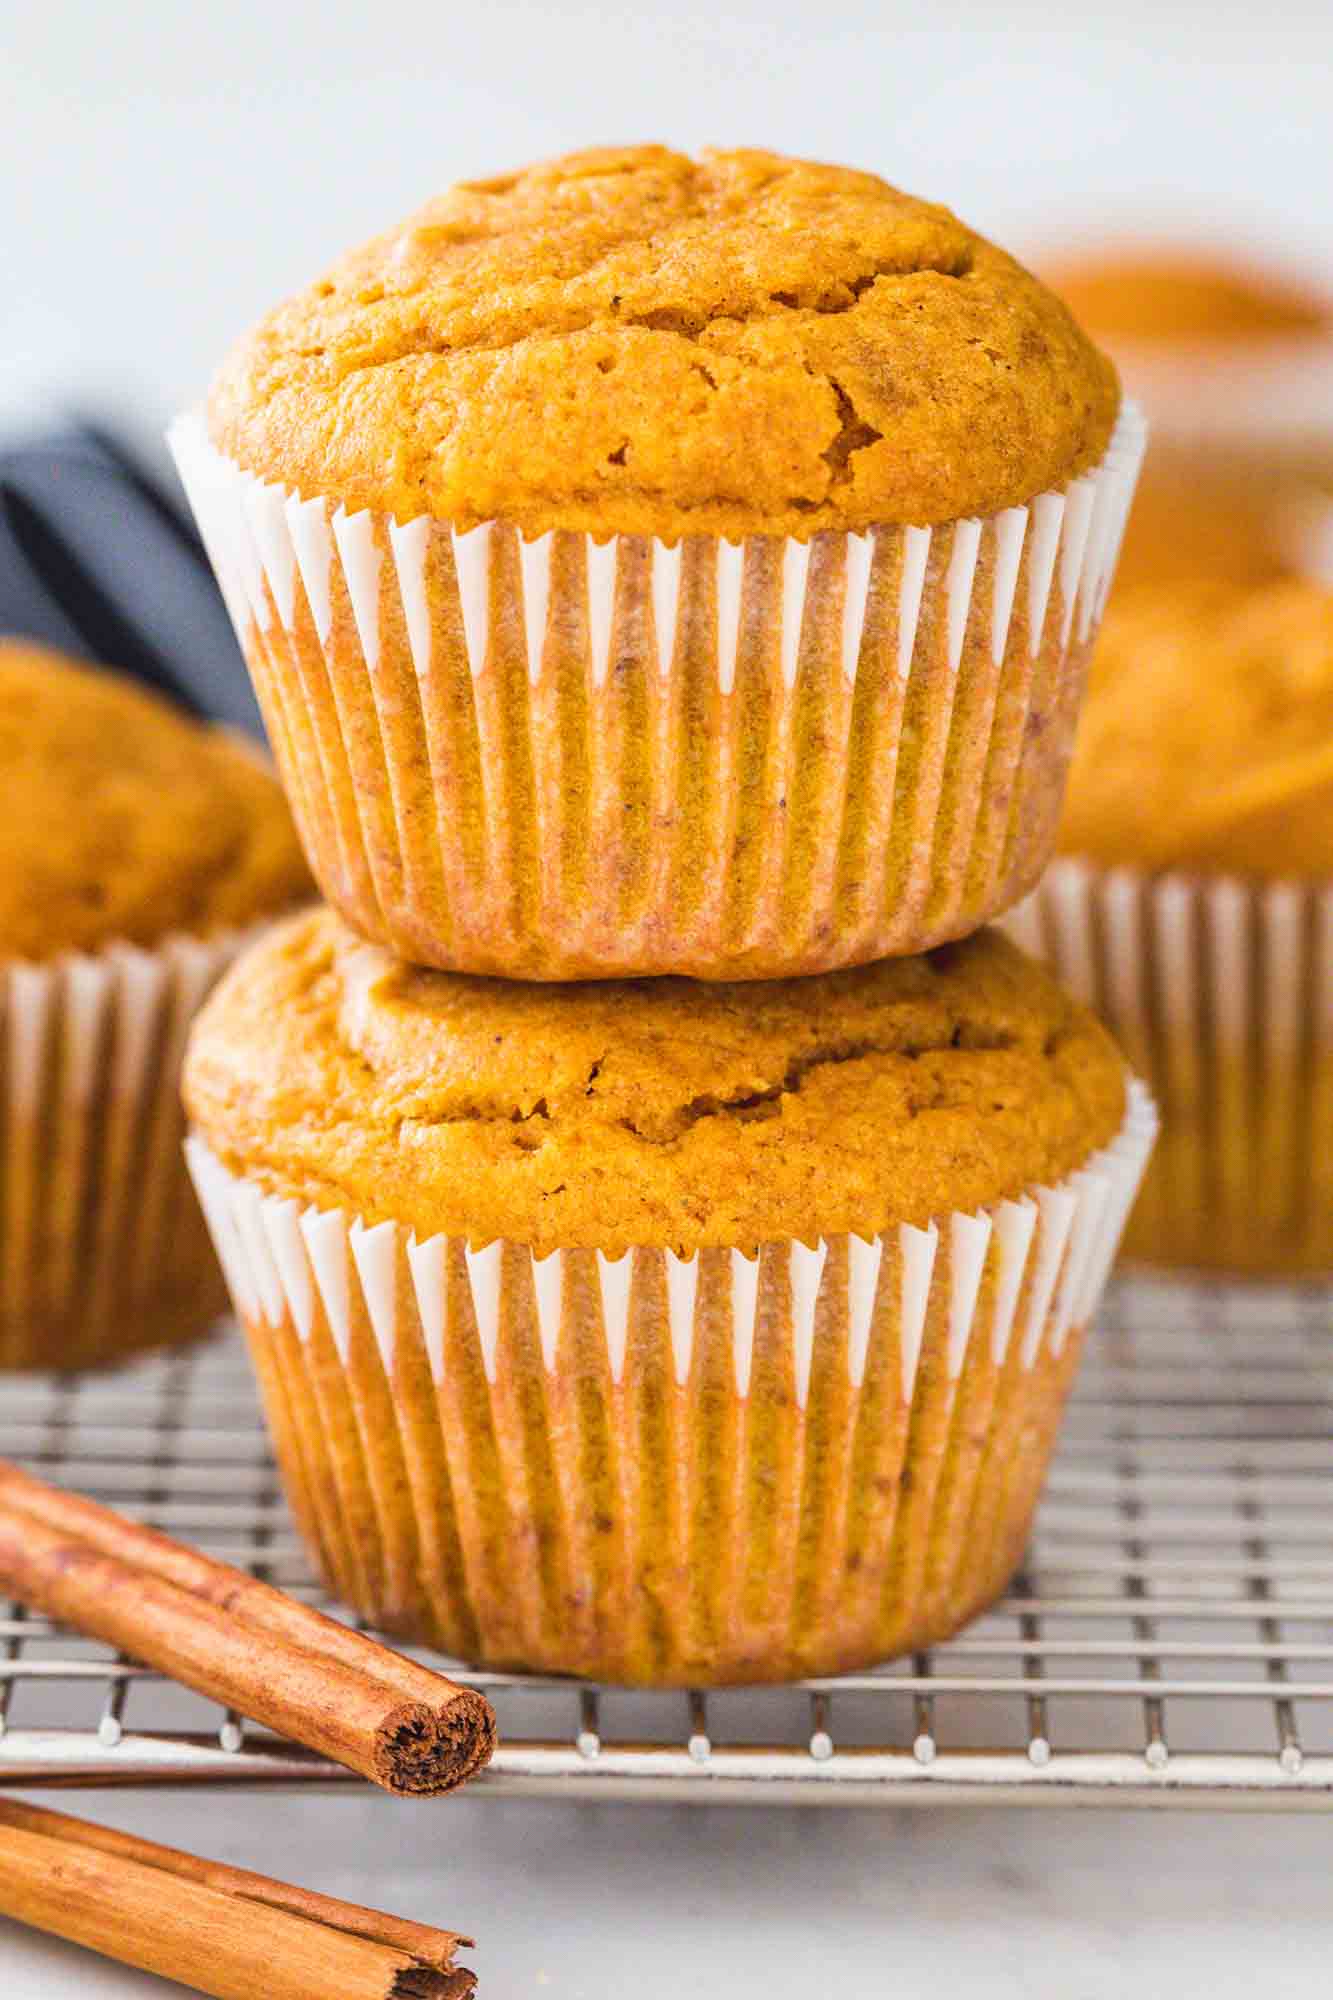 Two pumpkin muffins stacked on a wire rack, and cinnamon sticks on the side